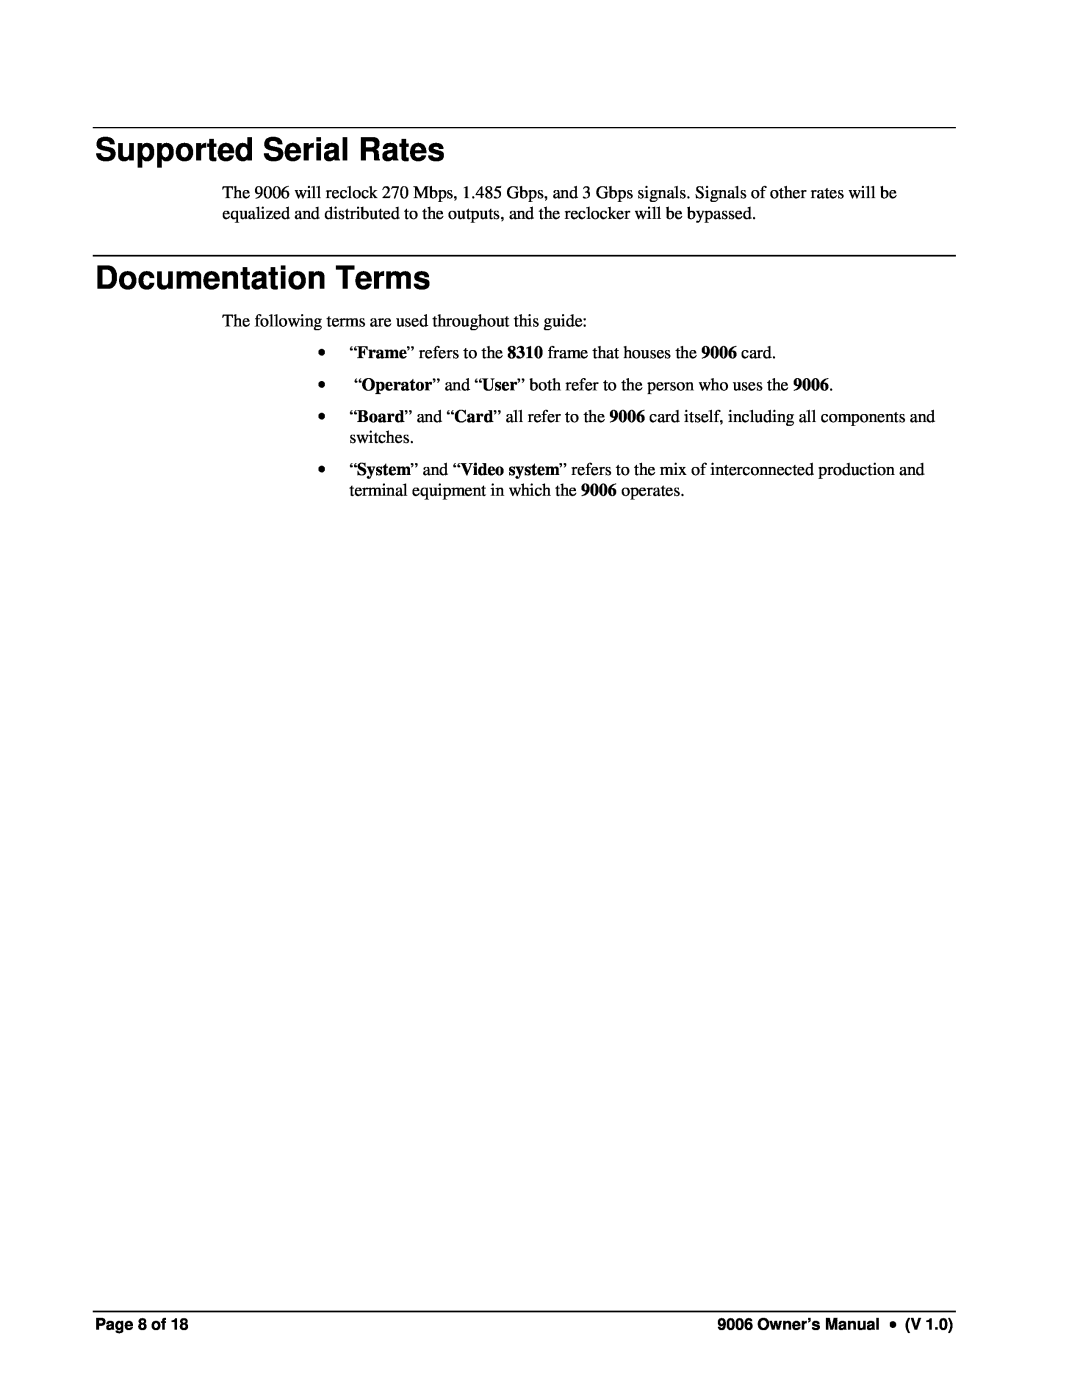 Cobalt Networks 9006 owner manual Supported Serial Rates, Documentation Terms, Page 8 of 